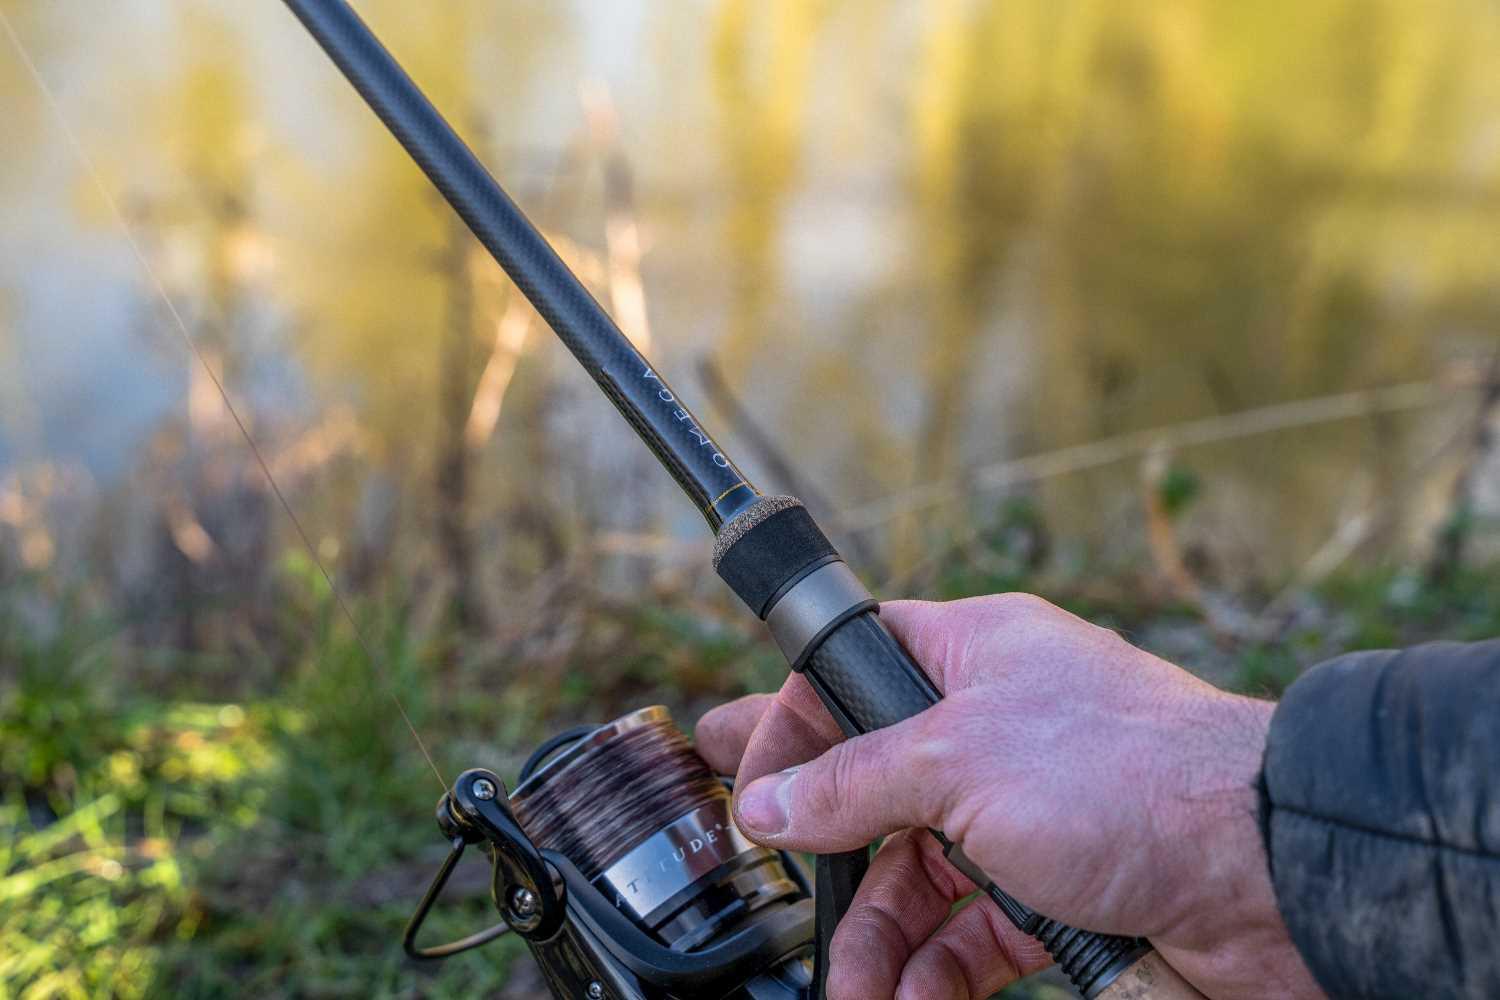 Korum Fishing Scales: Accurate & Reliable for Anglers